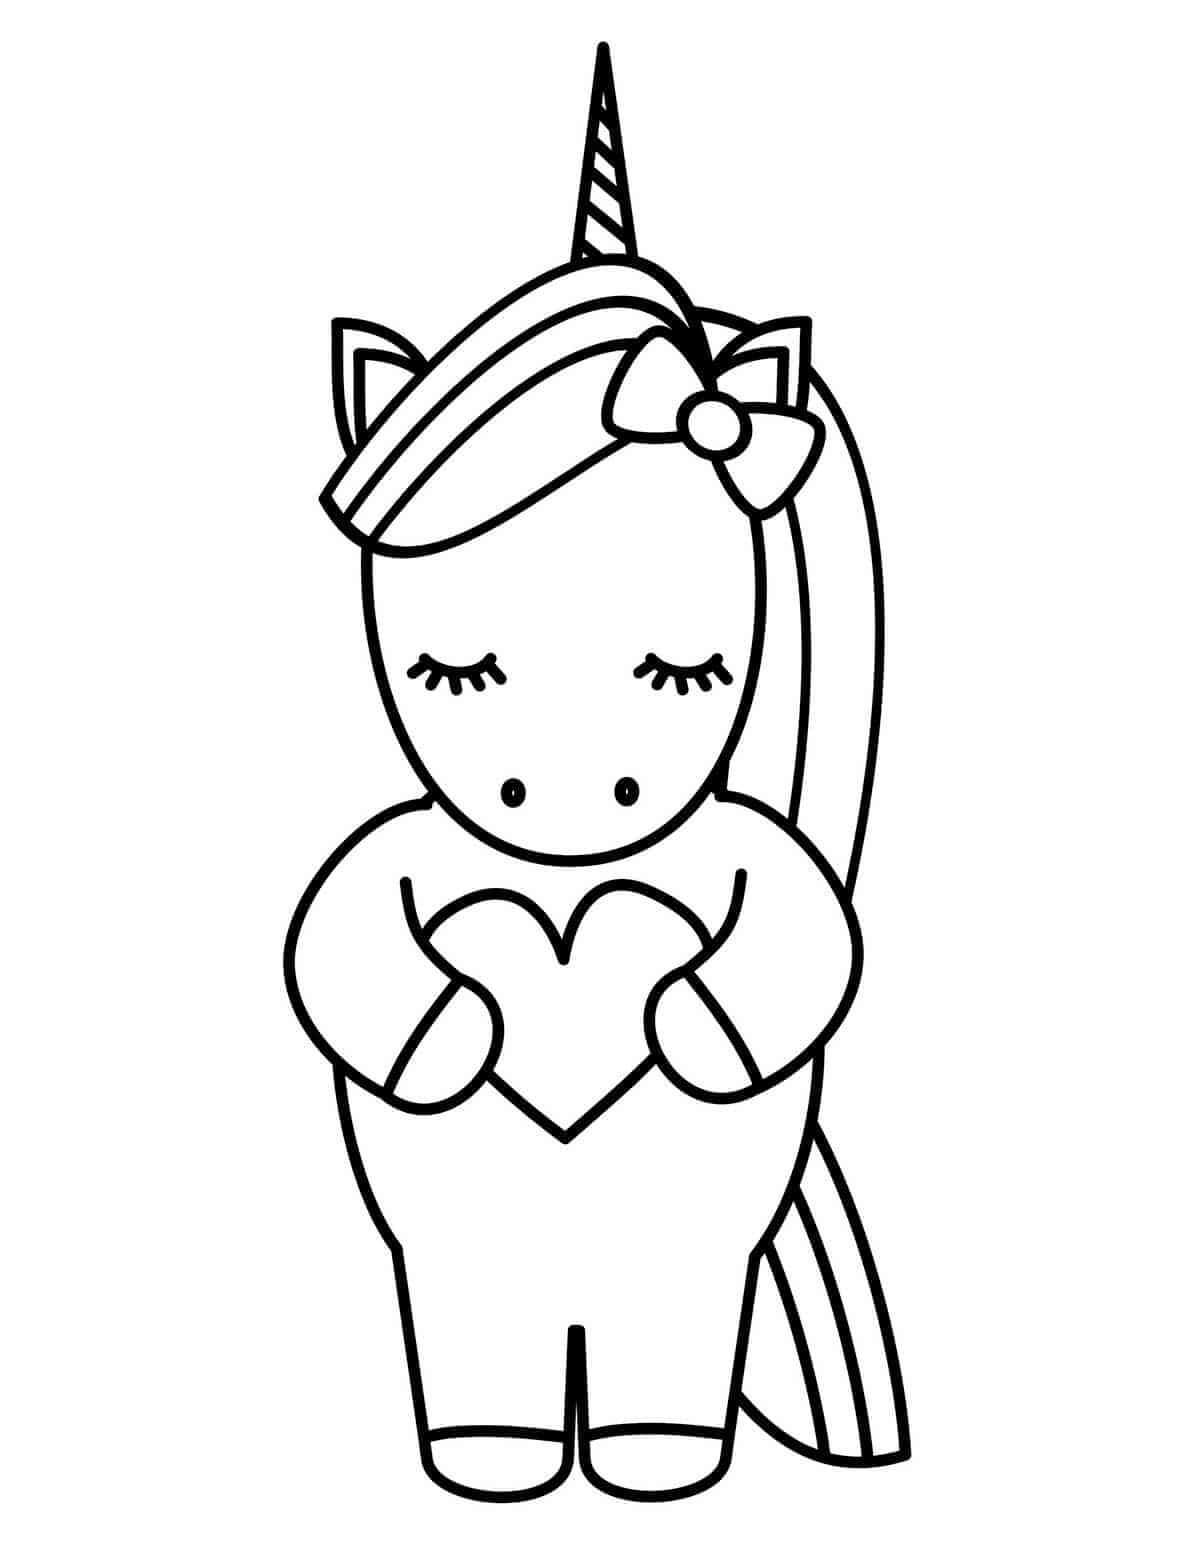 Easy Unicorn Valentine Day Coloring Pages